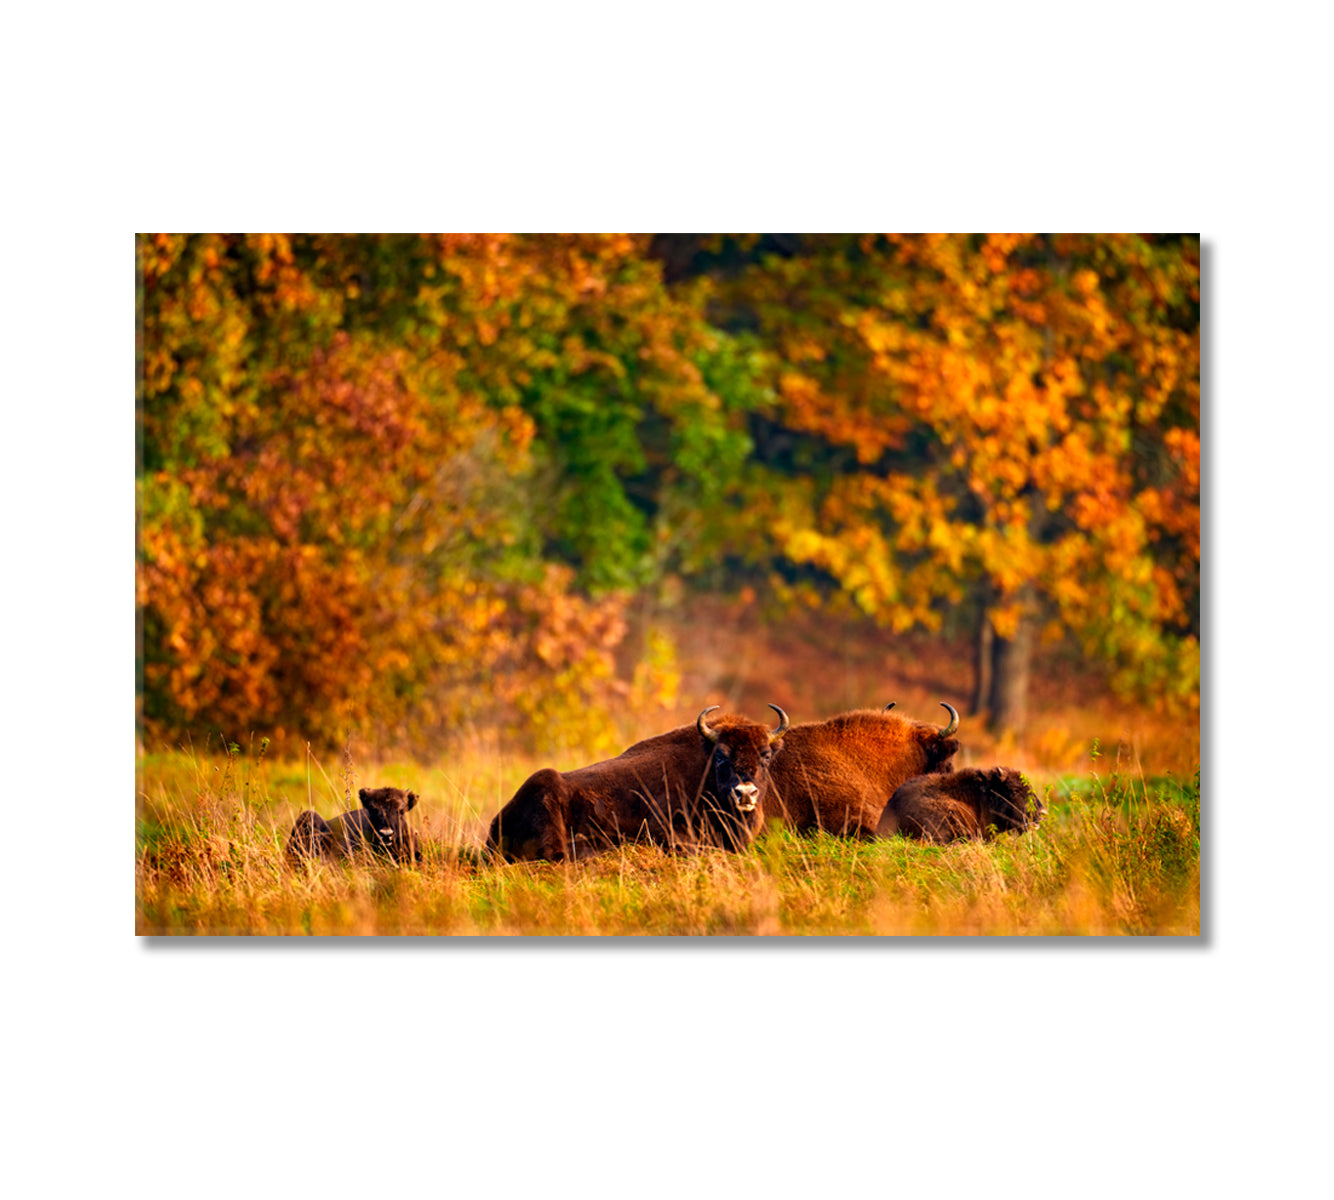 Bison Family in Autumn Forest Canvas Print-Canvas Print-CetArt-1 Panel-24x16 inches-CetArt